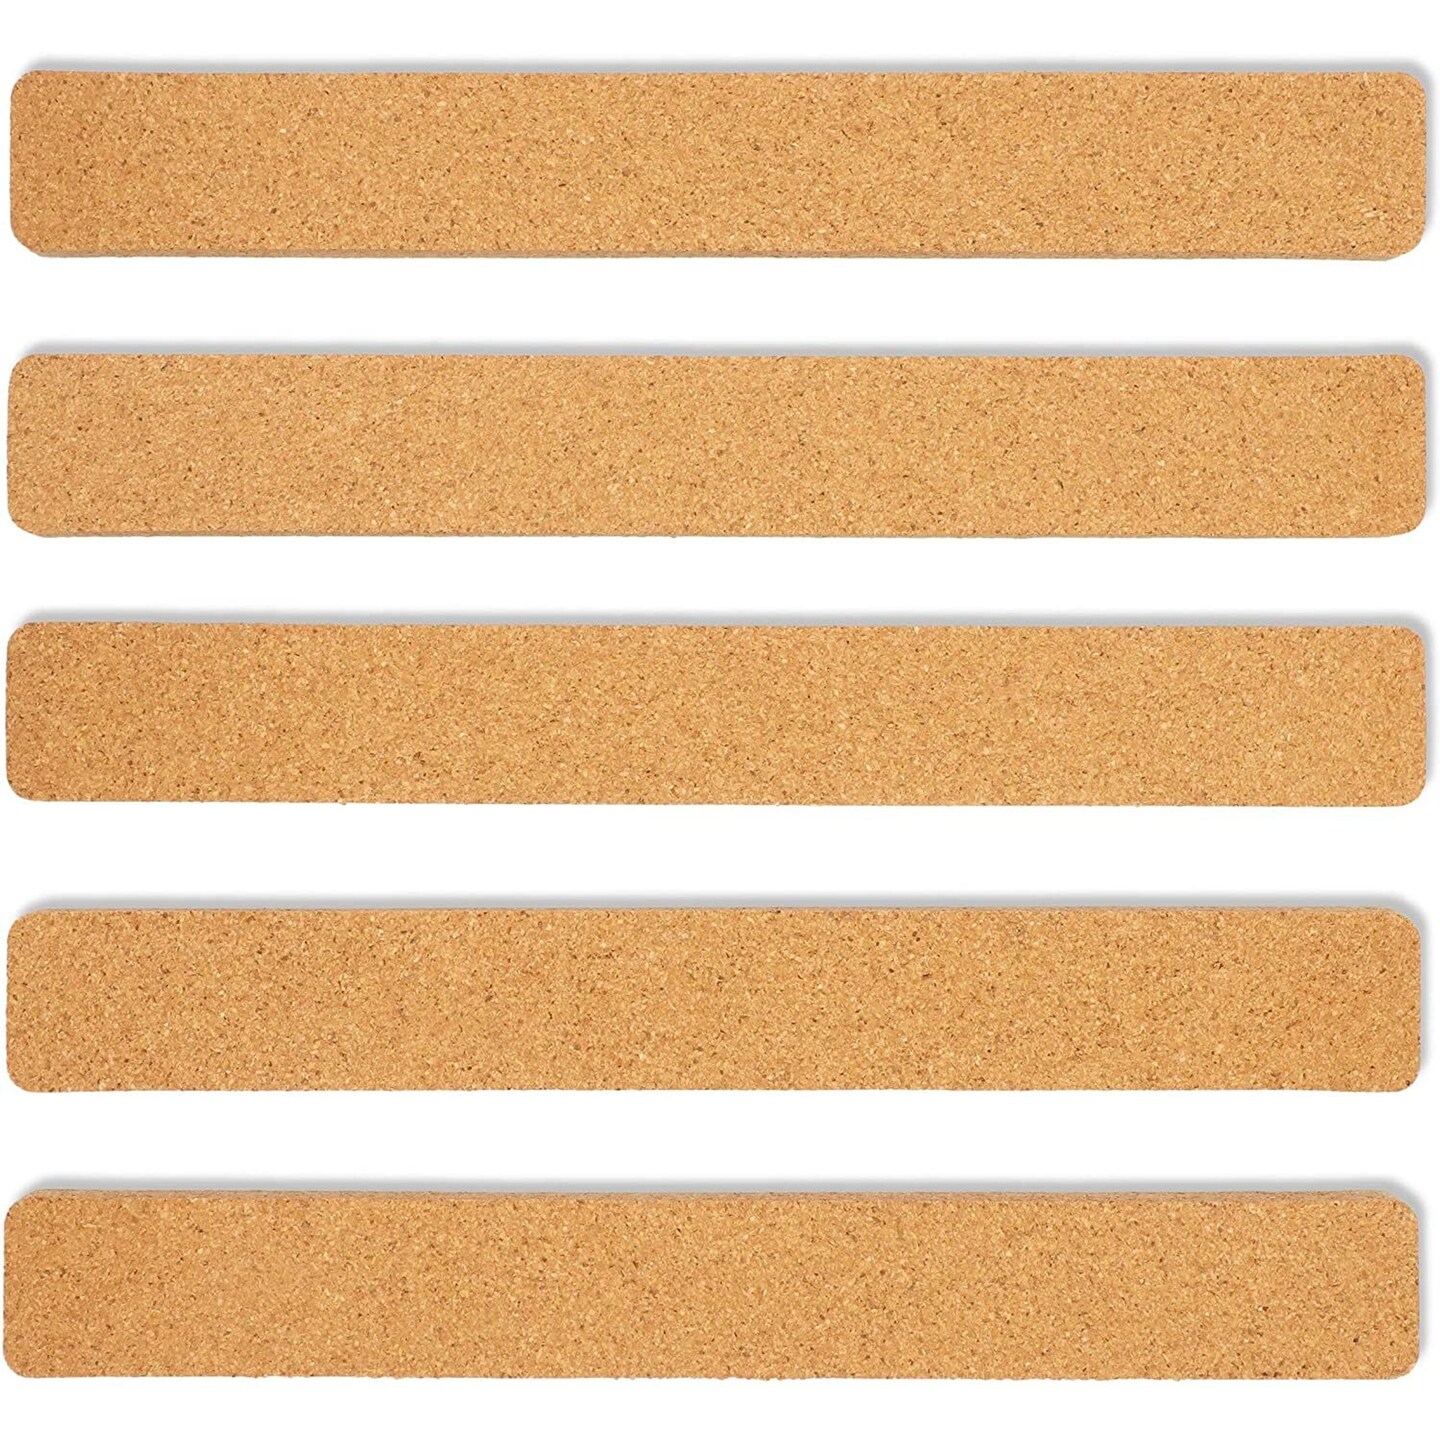 Cork Strip Bulletin Bars with Adhesive (11.95 x 1.5 In, 6 Pack)